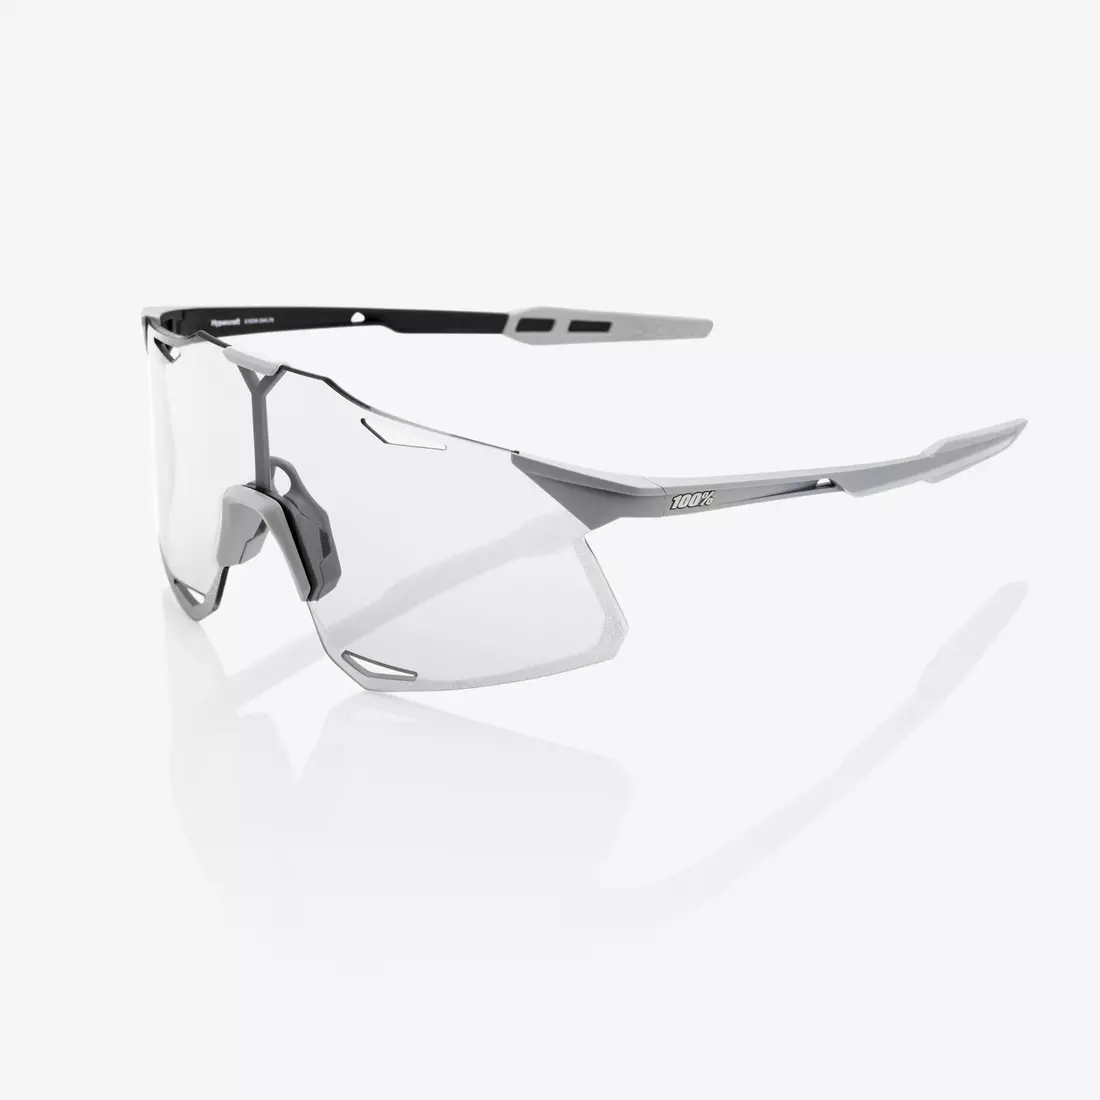 100% sports glasses hypercraft matte stone grey HiPER coral lens + clear lens STO-61039-394-79